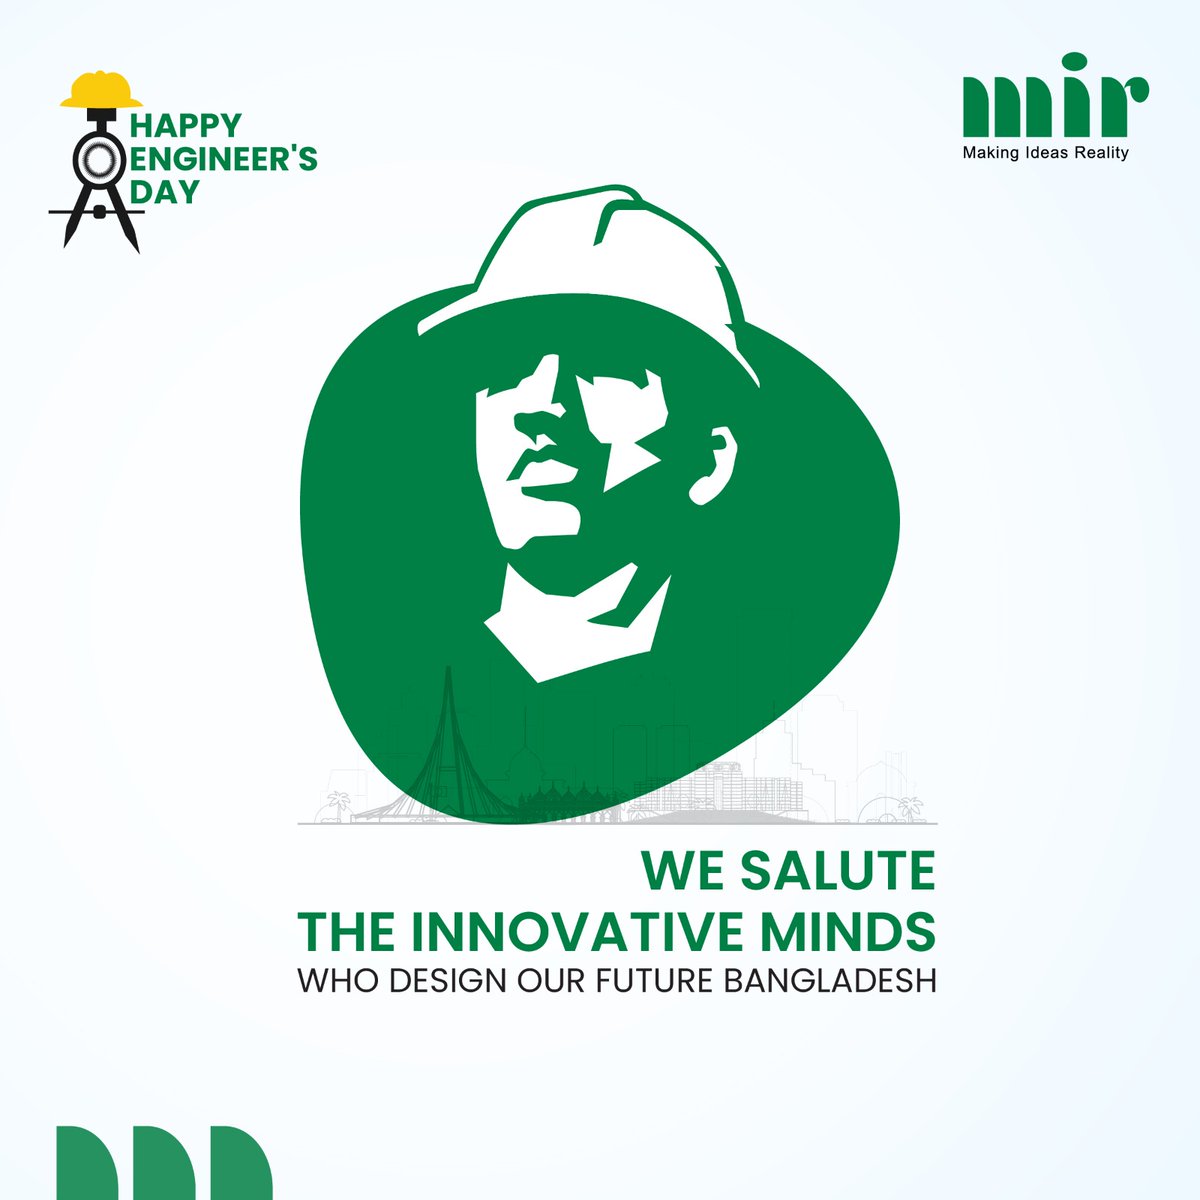 We appreciate the brilliant minds who design, build, and innovate to shape a better tomorrow. 

Happy Engineer's Day!

#MirGroup #MG #MakingIdeasReality
#engineersday #engineer #engineers
#Bangladesh